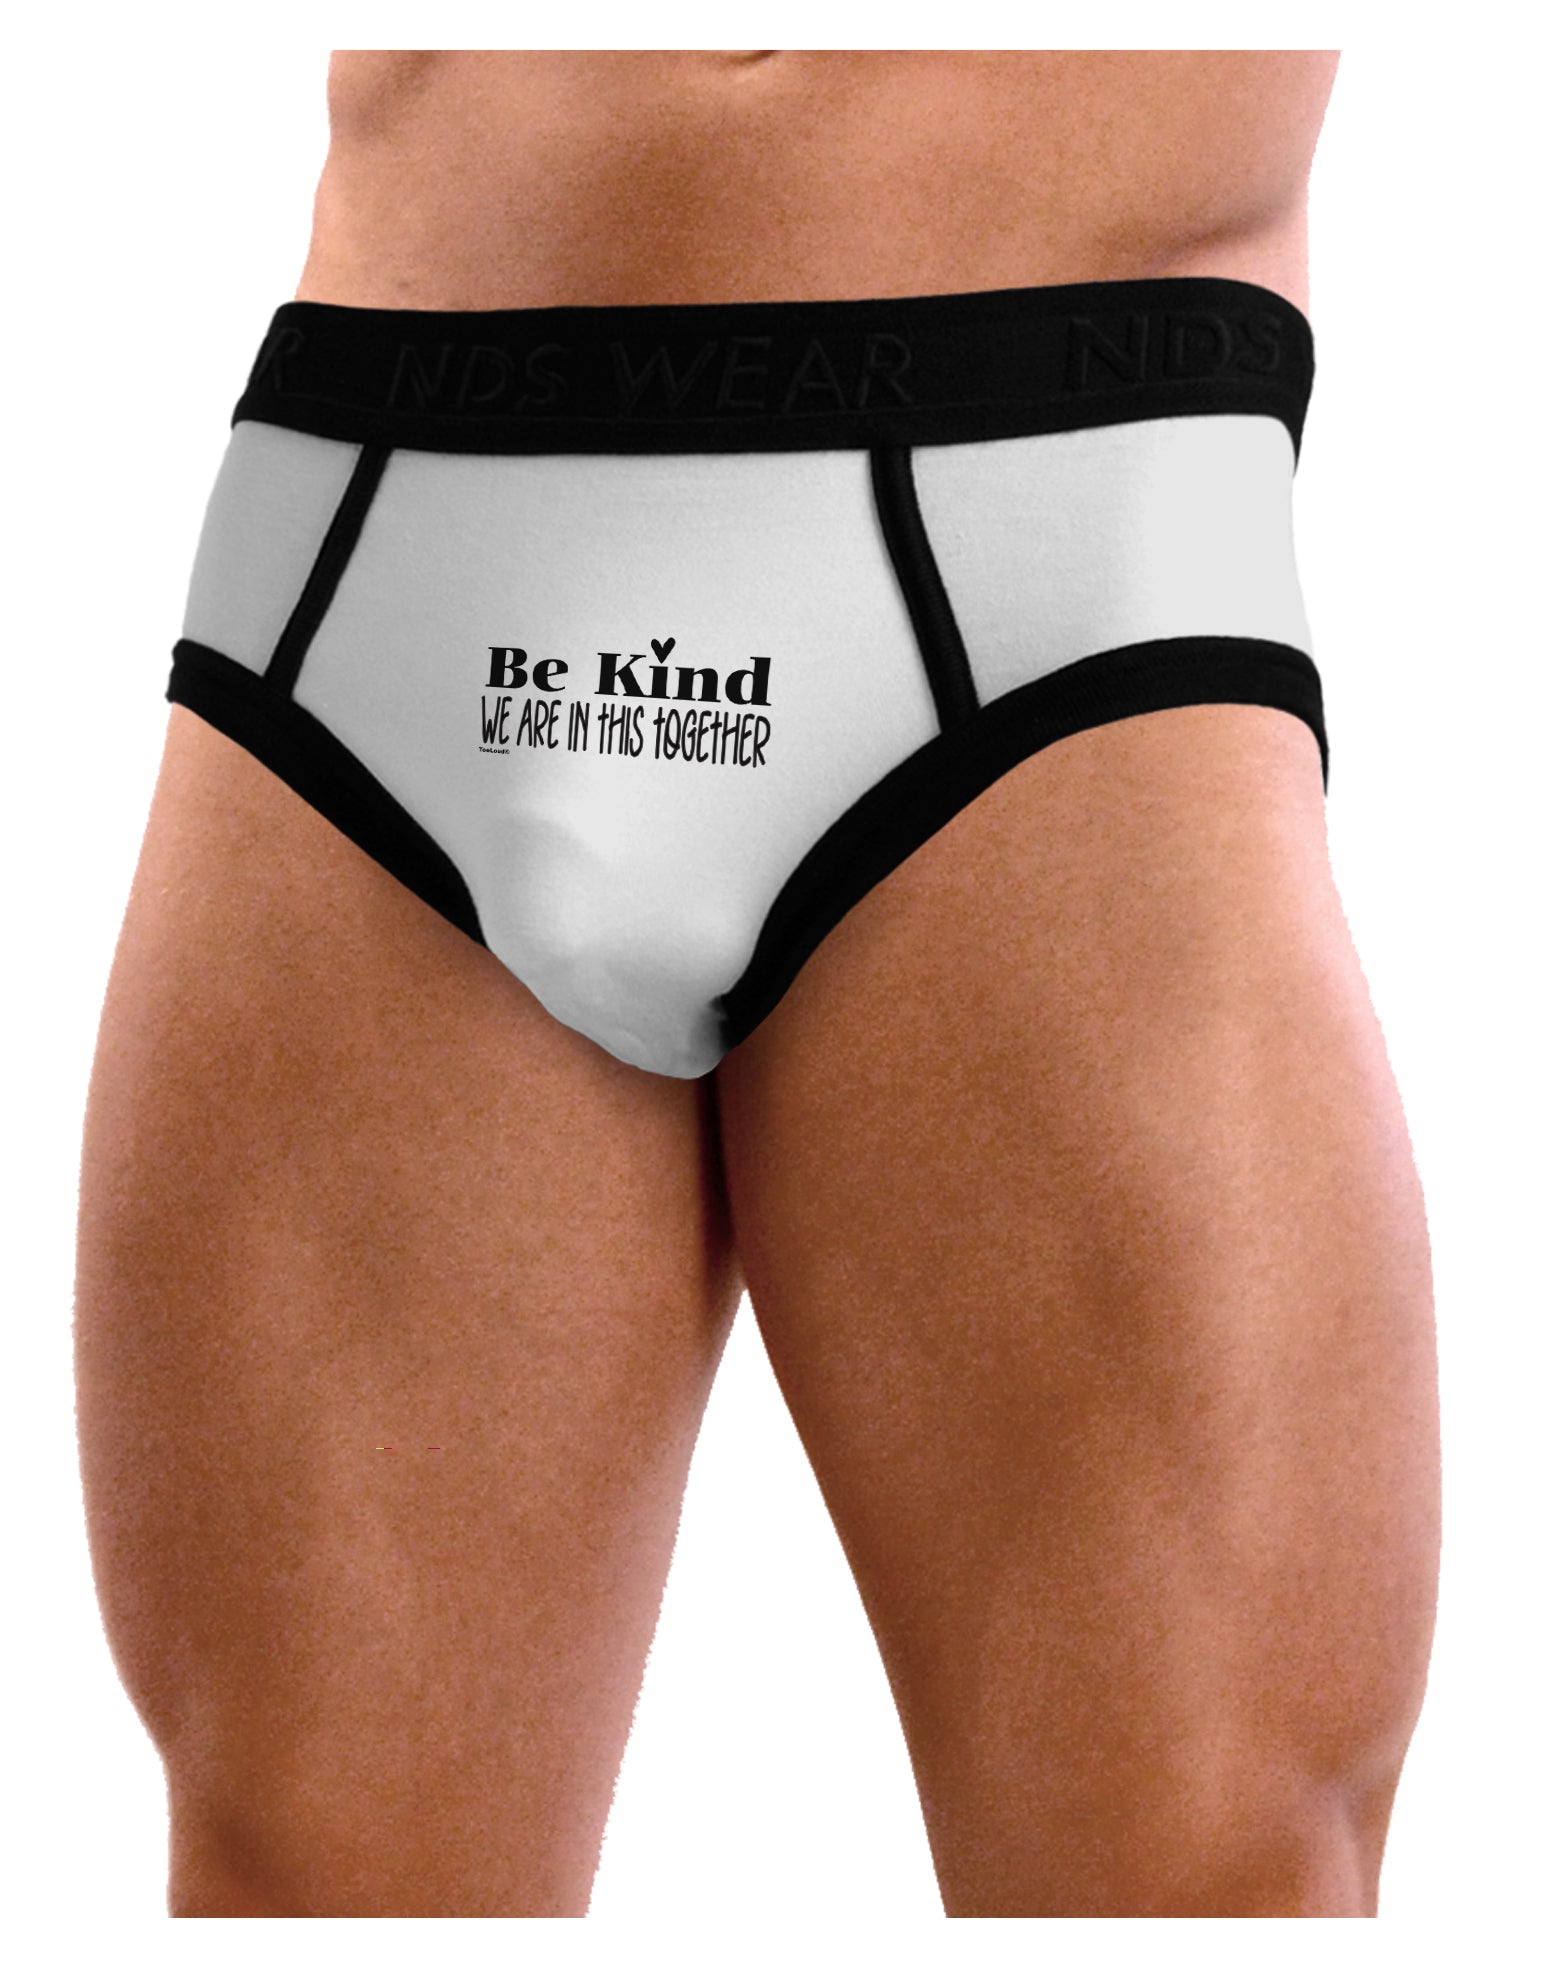 Be kind we are in this together Mens NDS Wear Briefs Underwear